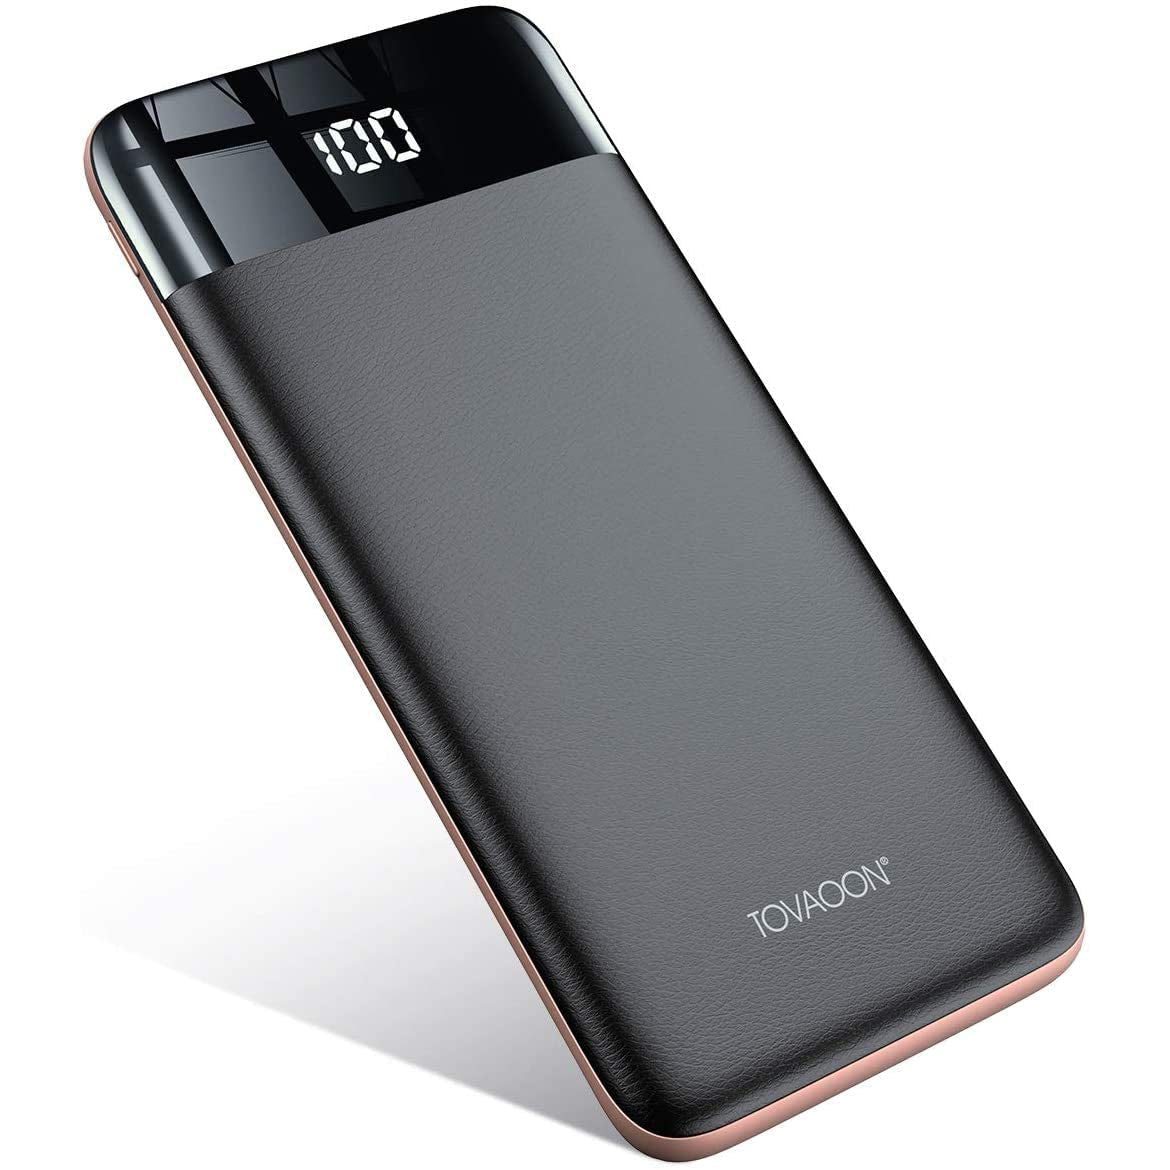 Tovaoon Portable Phone Charger, 10000mAh Power Bank with Full screen LED display